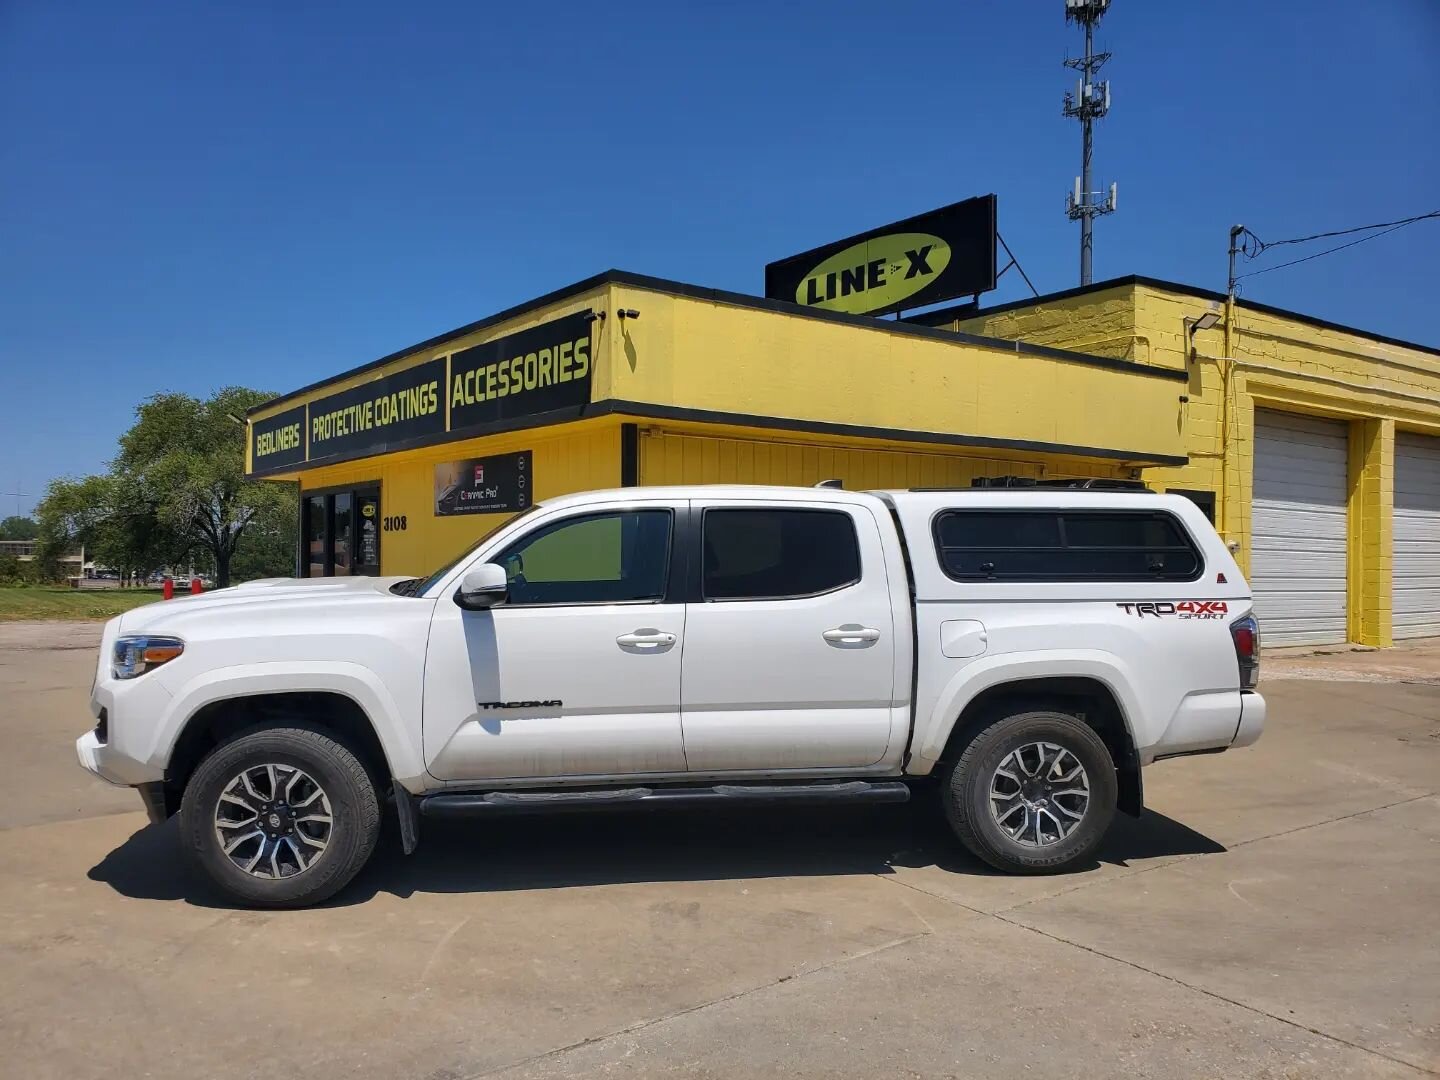 Let the adventures begin! 🏞

2021 Toyota Tacoma - LEER 100R
✅ ️Thule Roof Tracks
✅ ️Dual Windoors w/ Slider
✅ ️Fixed Front Slider Window
✅️ 3 Outlet Power Block

GEAR for where you're GOING!

Topeka LINE-X &amp; Accessories Center 
🌎 3108 SW Topeka